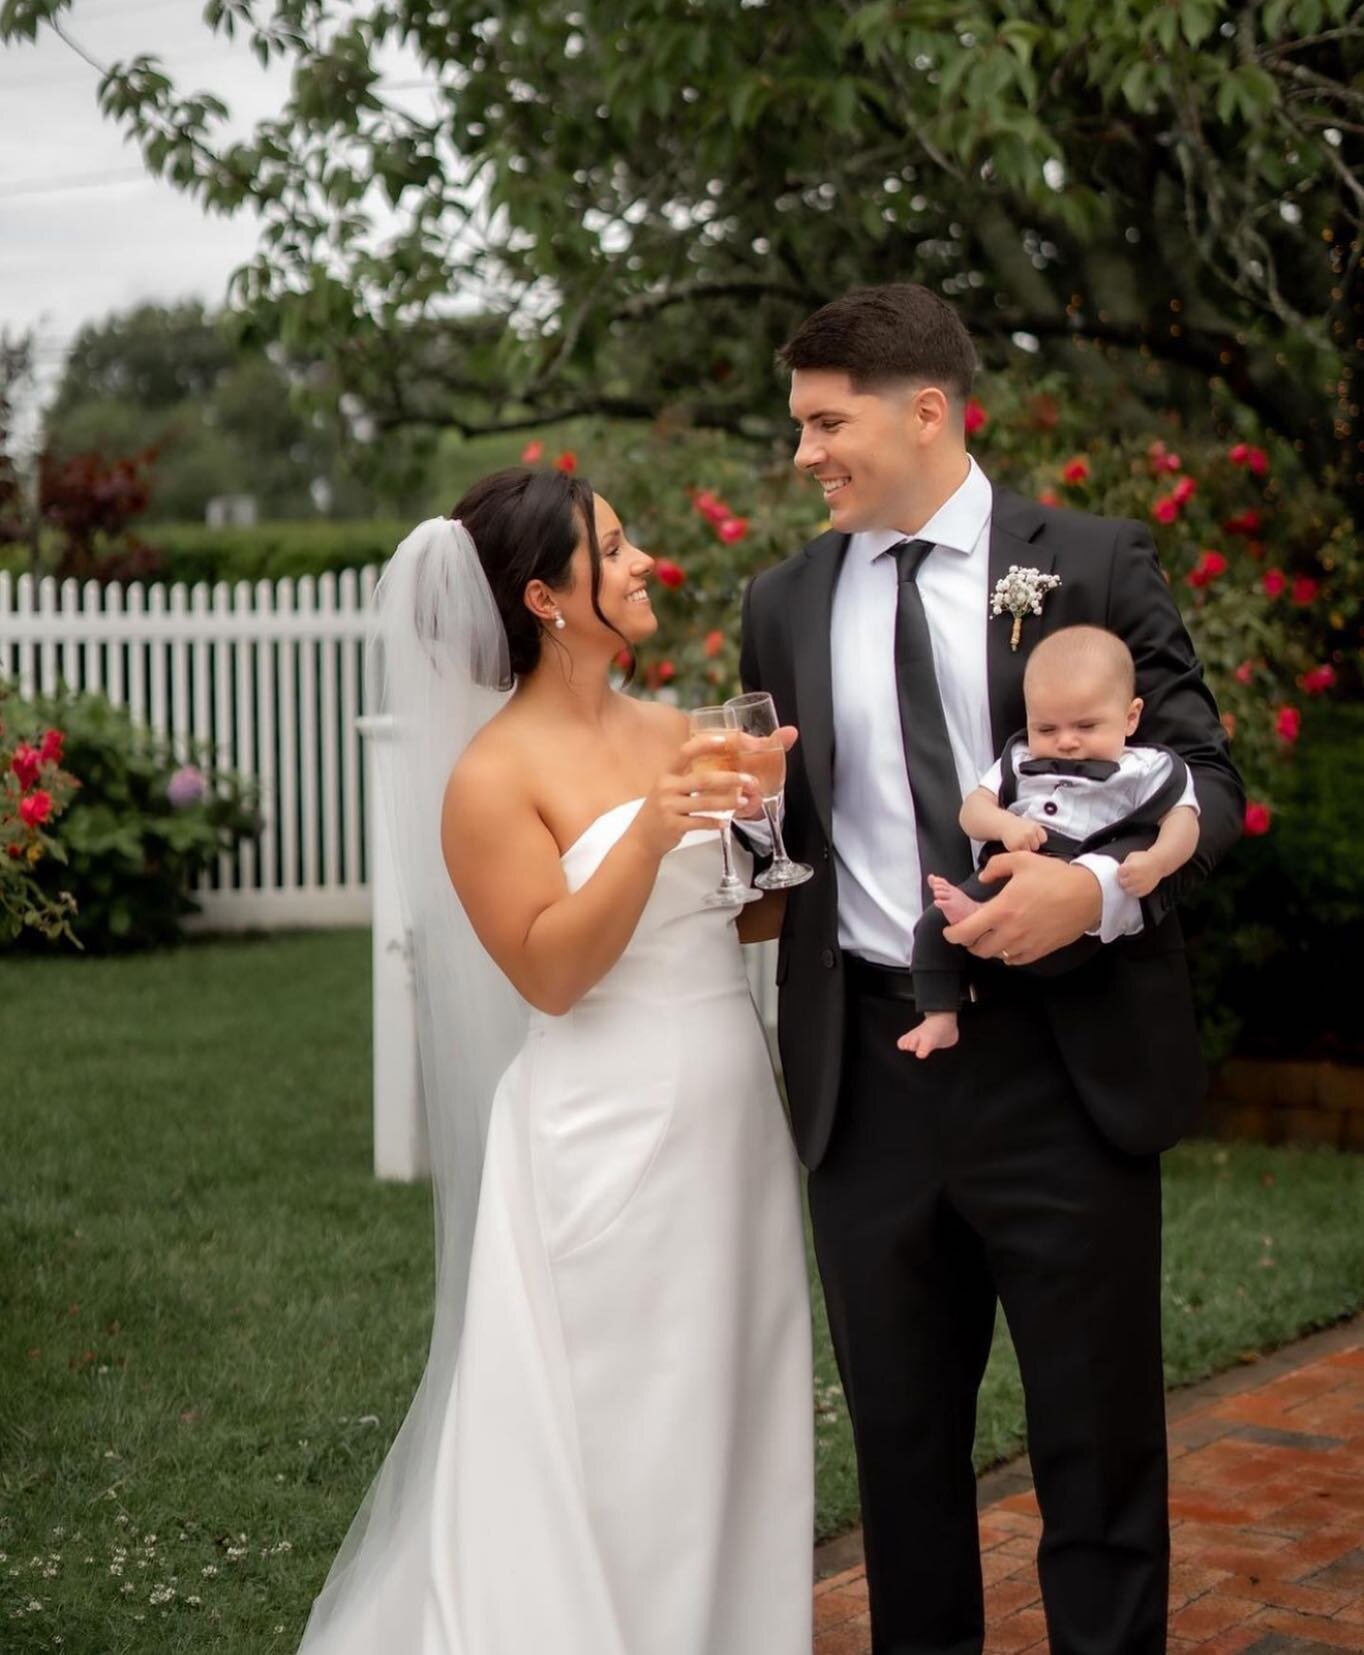 Family 🫶🏻

Hair + Makeup: @sincerelysomethingborrowed 
Venue: @snapperinn 
Photographer: @nydiarose 

Sincerely Something Borrowed | Hamptons 🤍

Offers on-site hair and makeup services for weddings, corporate + commercial work, editorial, + events